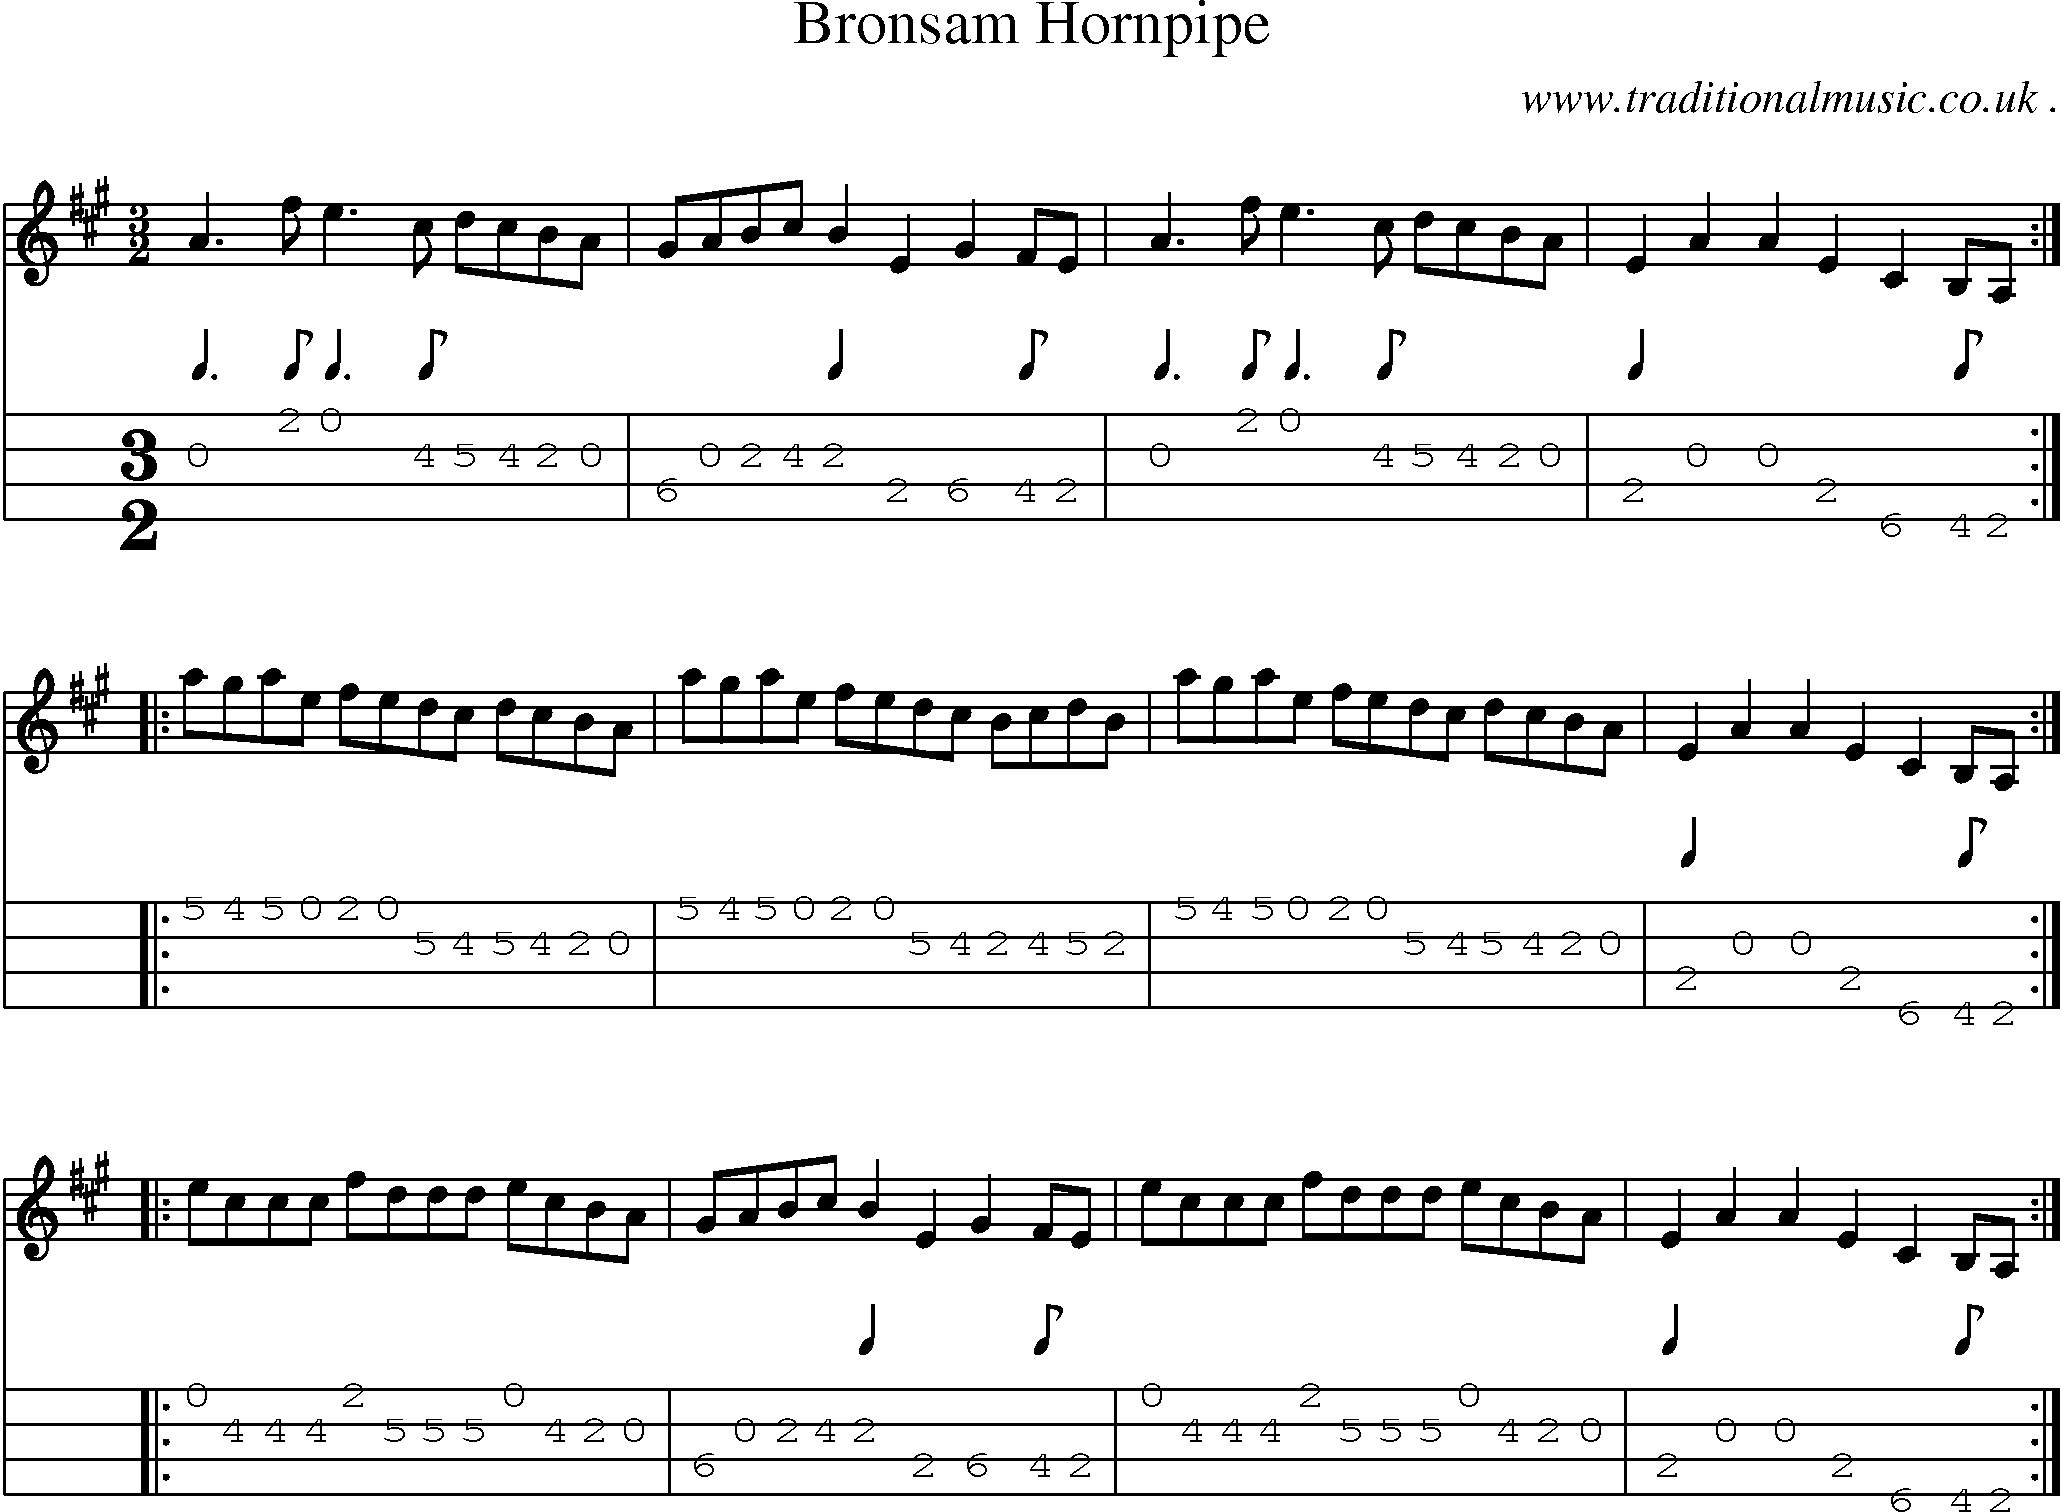 Sheet-Music and Mandolin Tabs for Bronsam Hornpipe